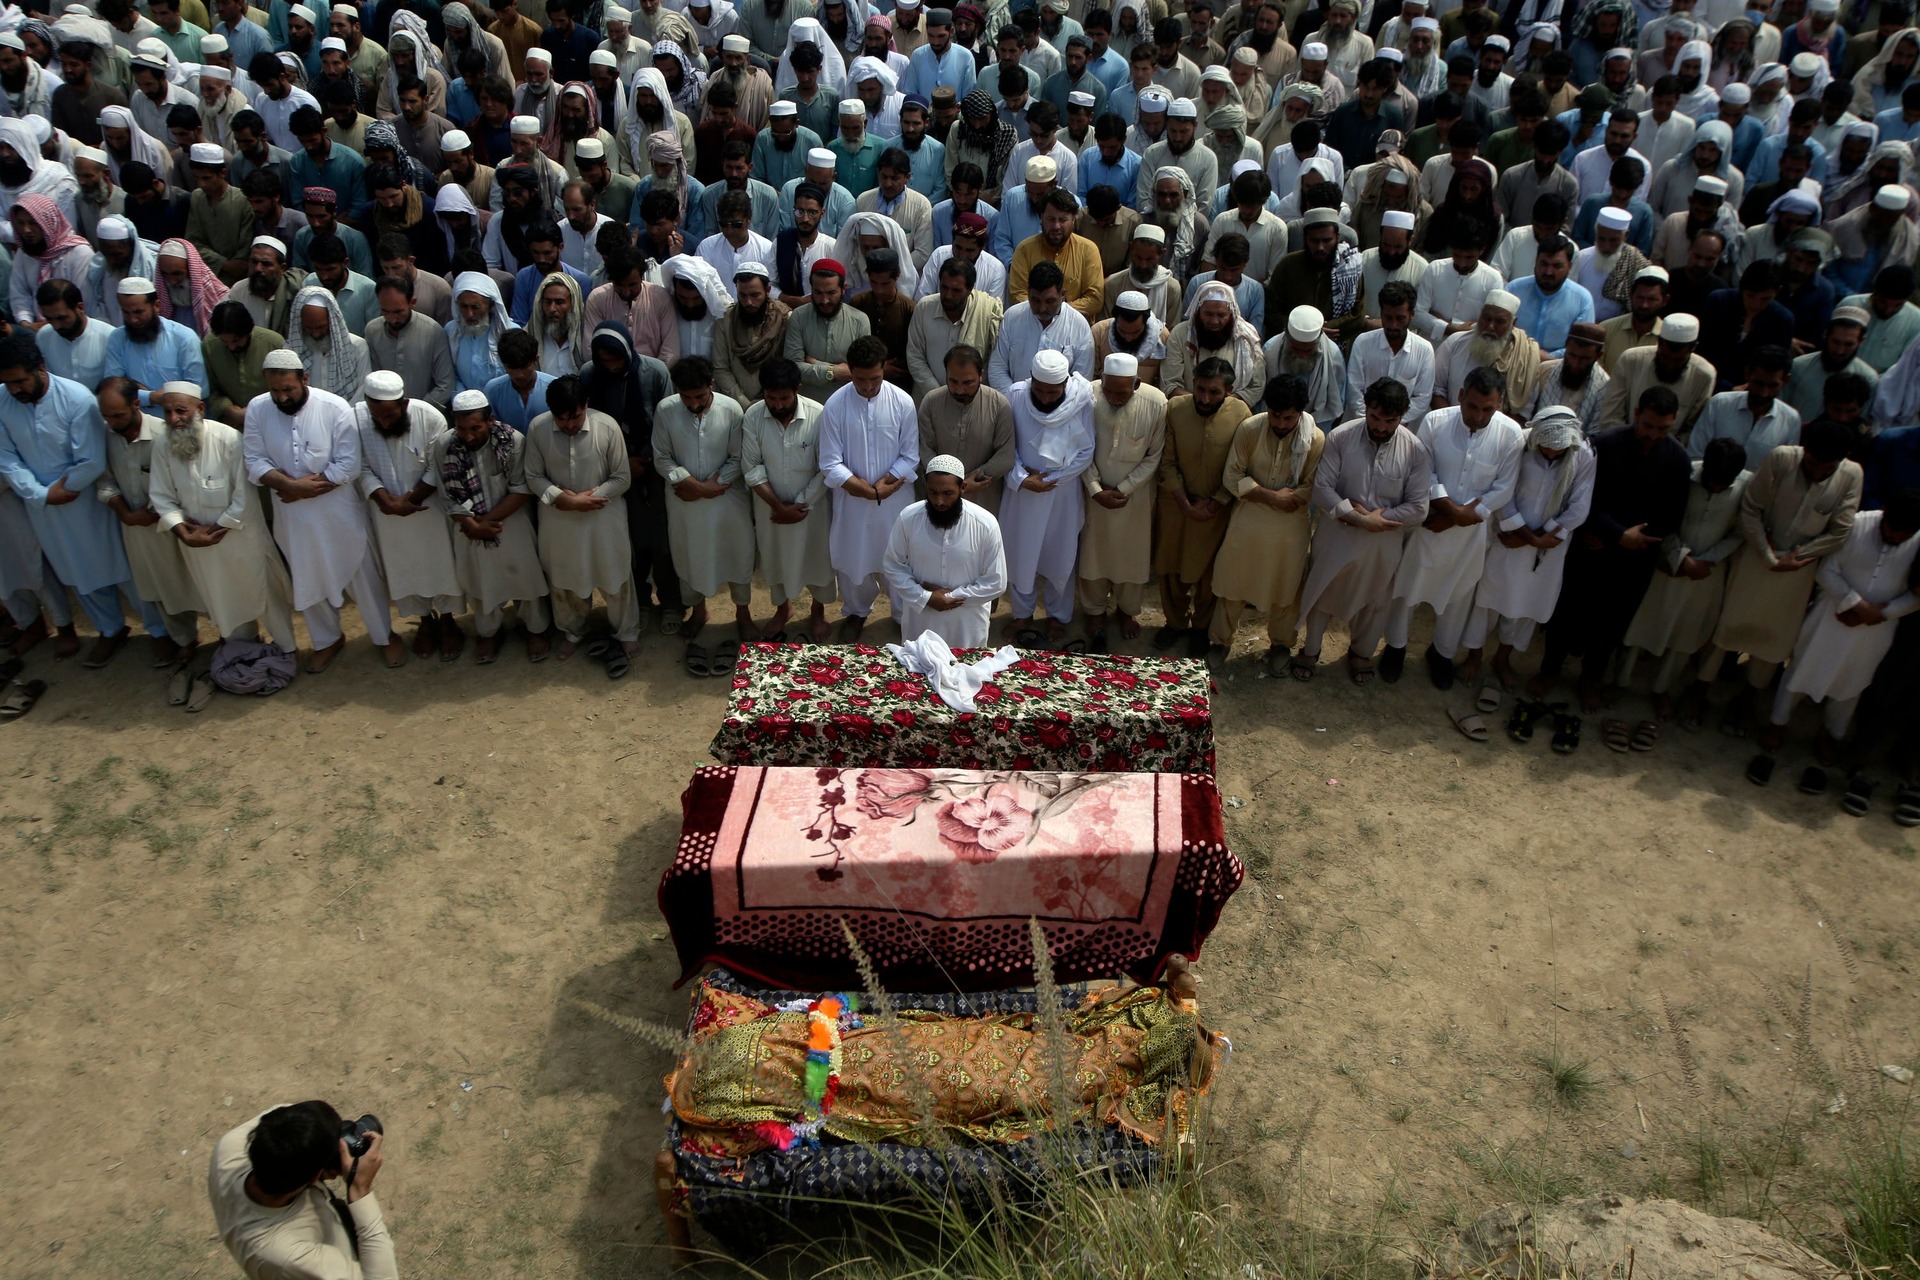 Relatives and mourners attend the funeral of victims who were killed in Sunday’s suicide bomber attack.